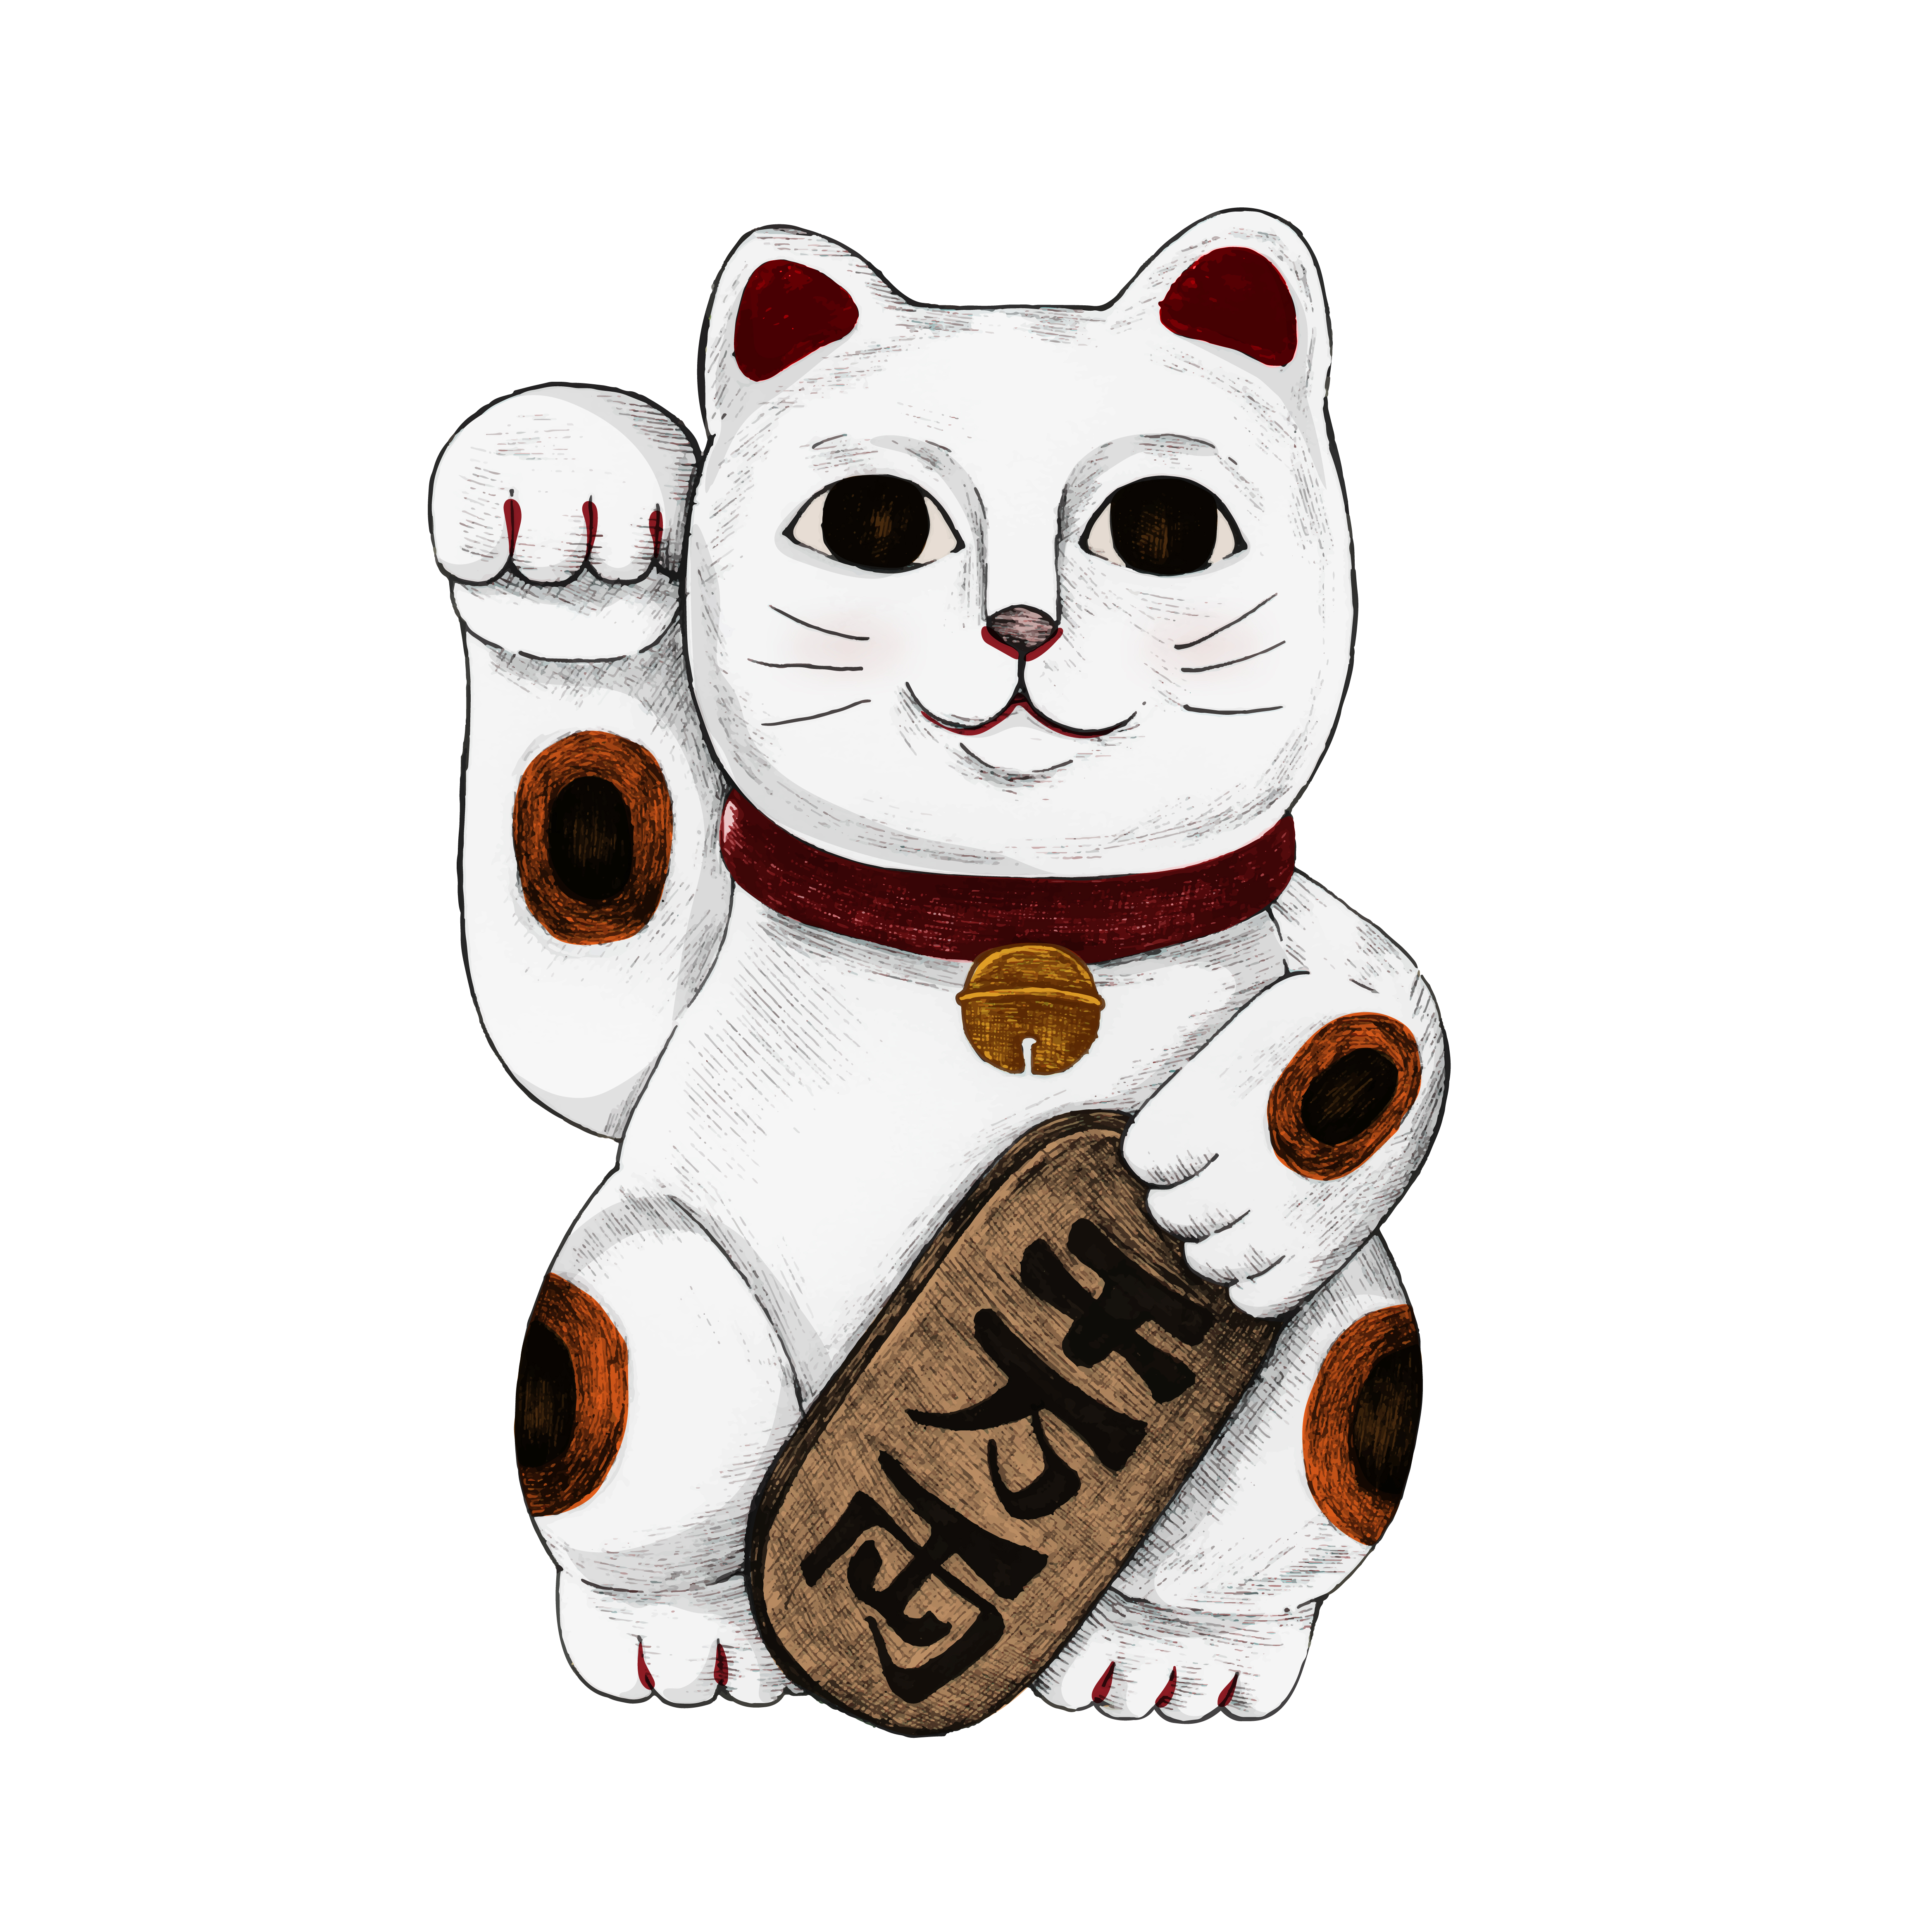 Illustration of Japanese lucky cat Download Free Vectors